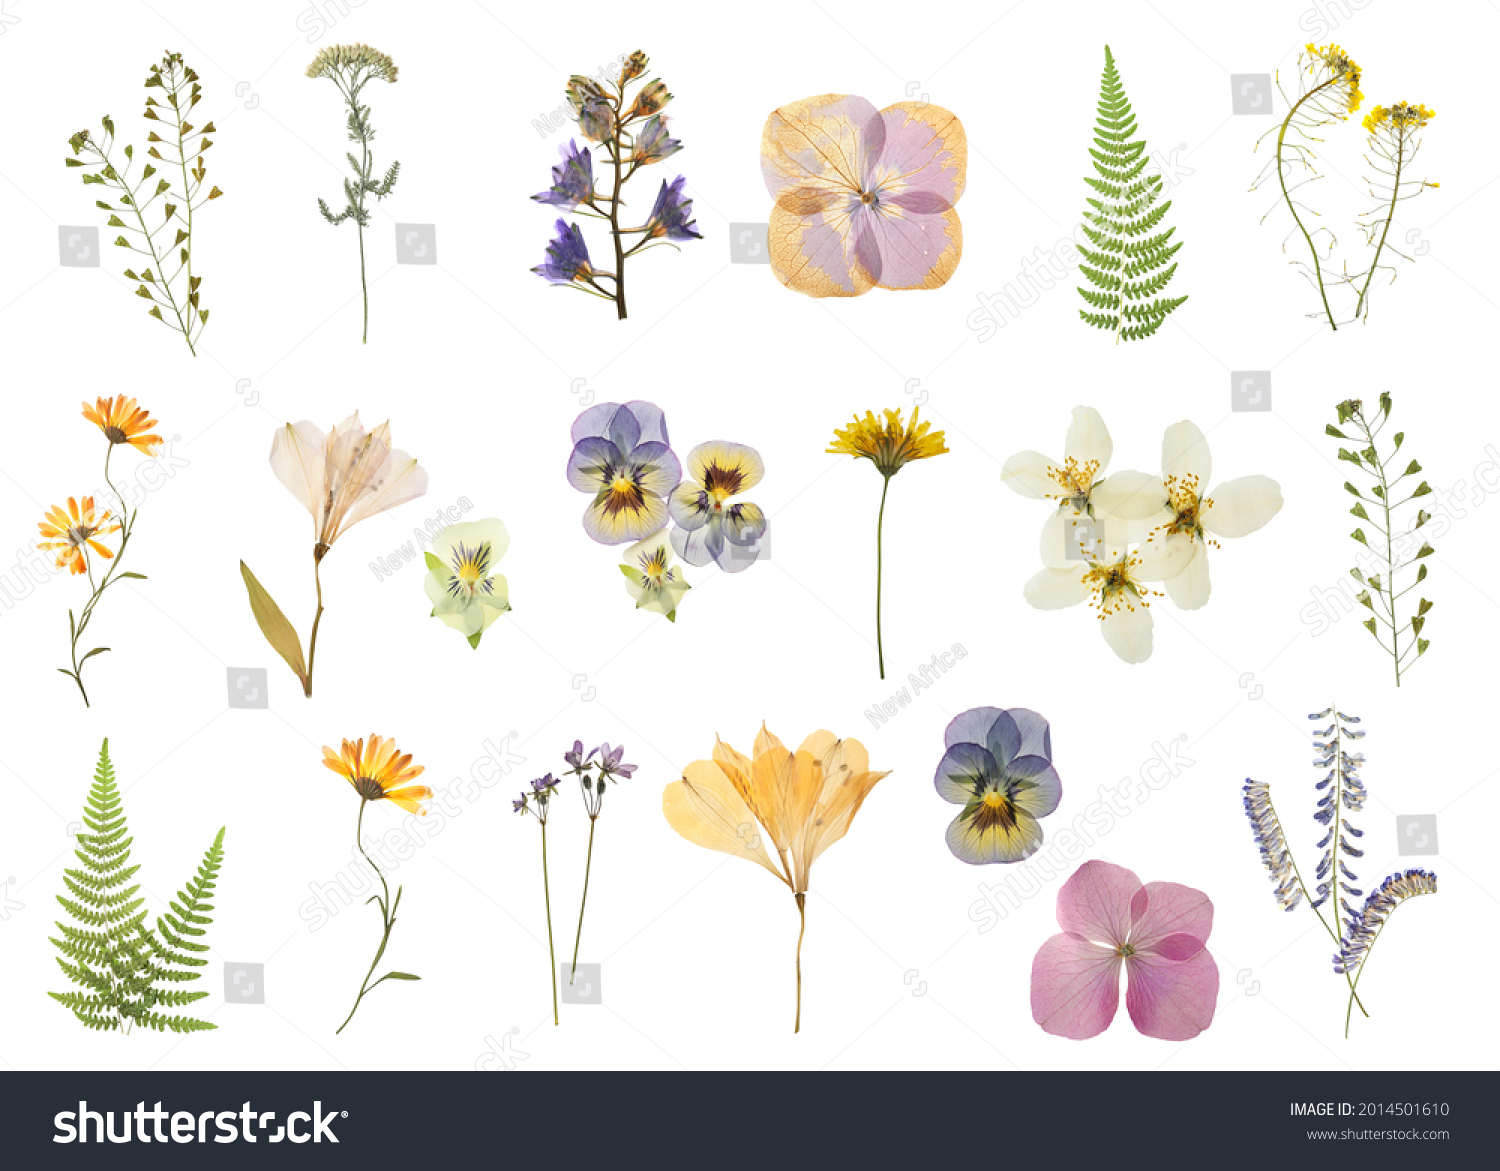 Set with beautiful dried meadow flowers on white background #2014501610